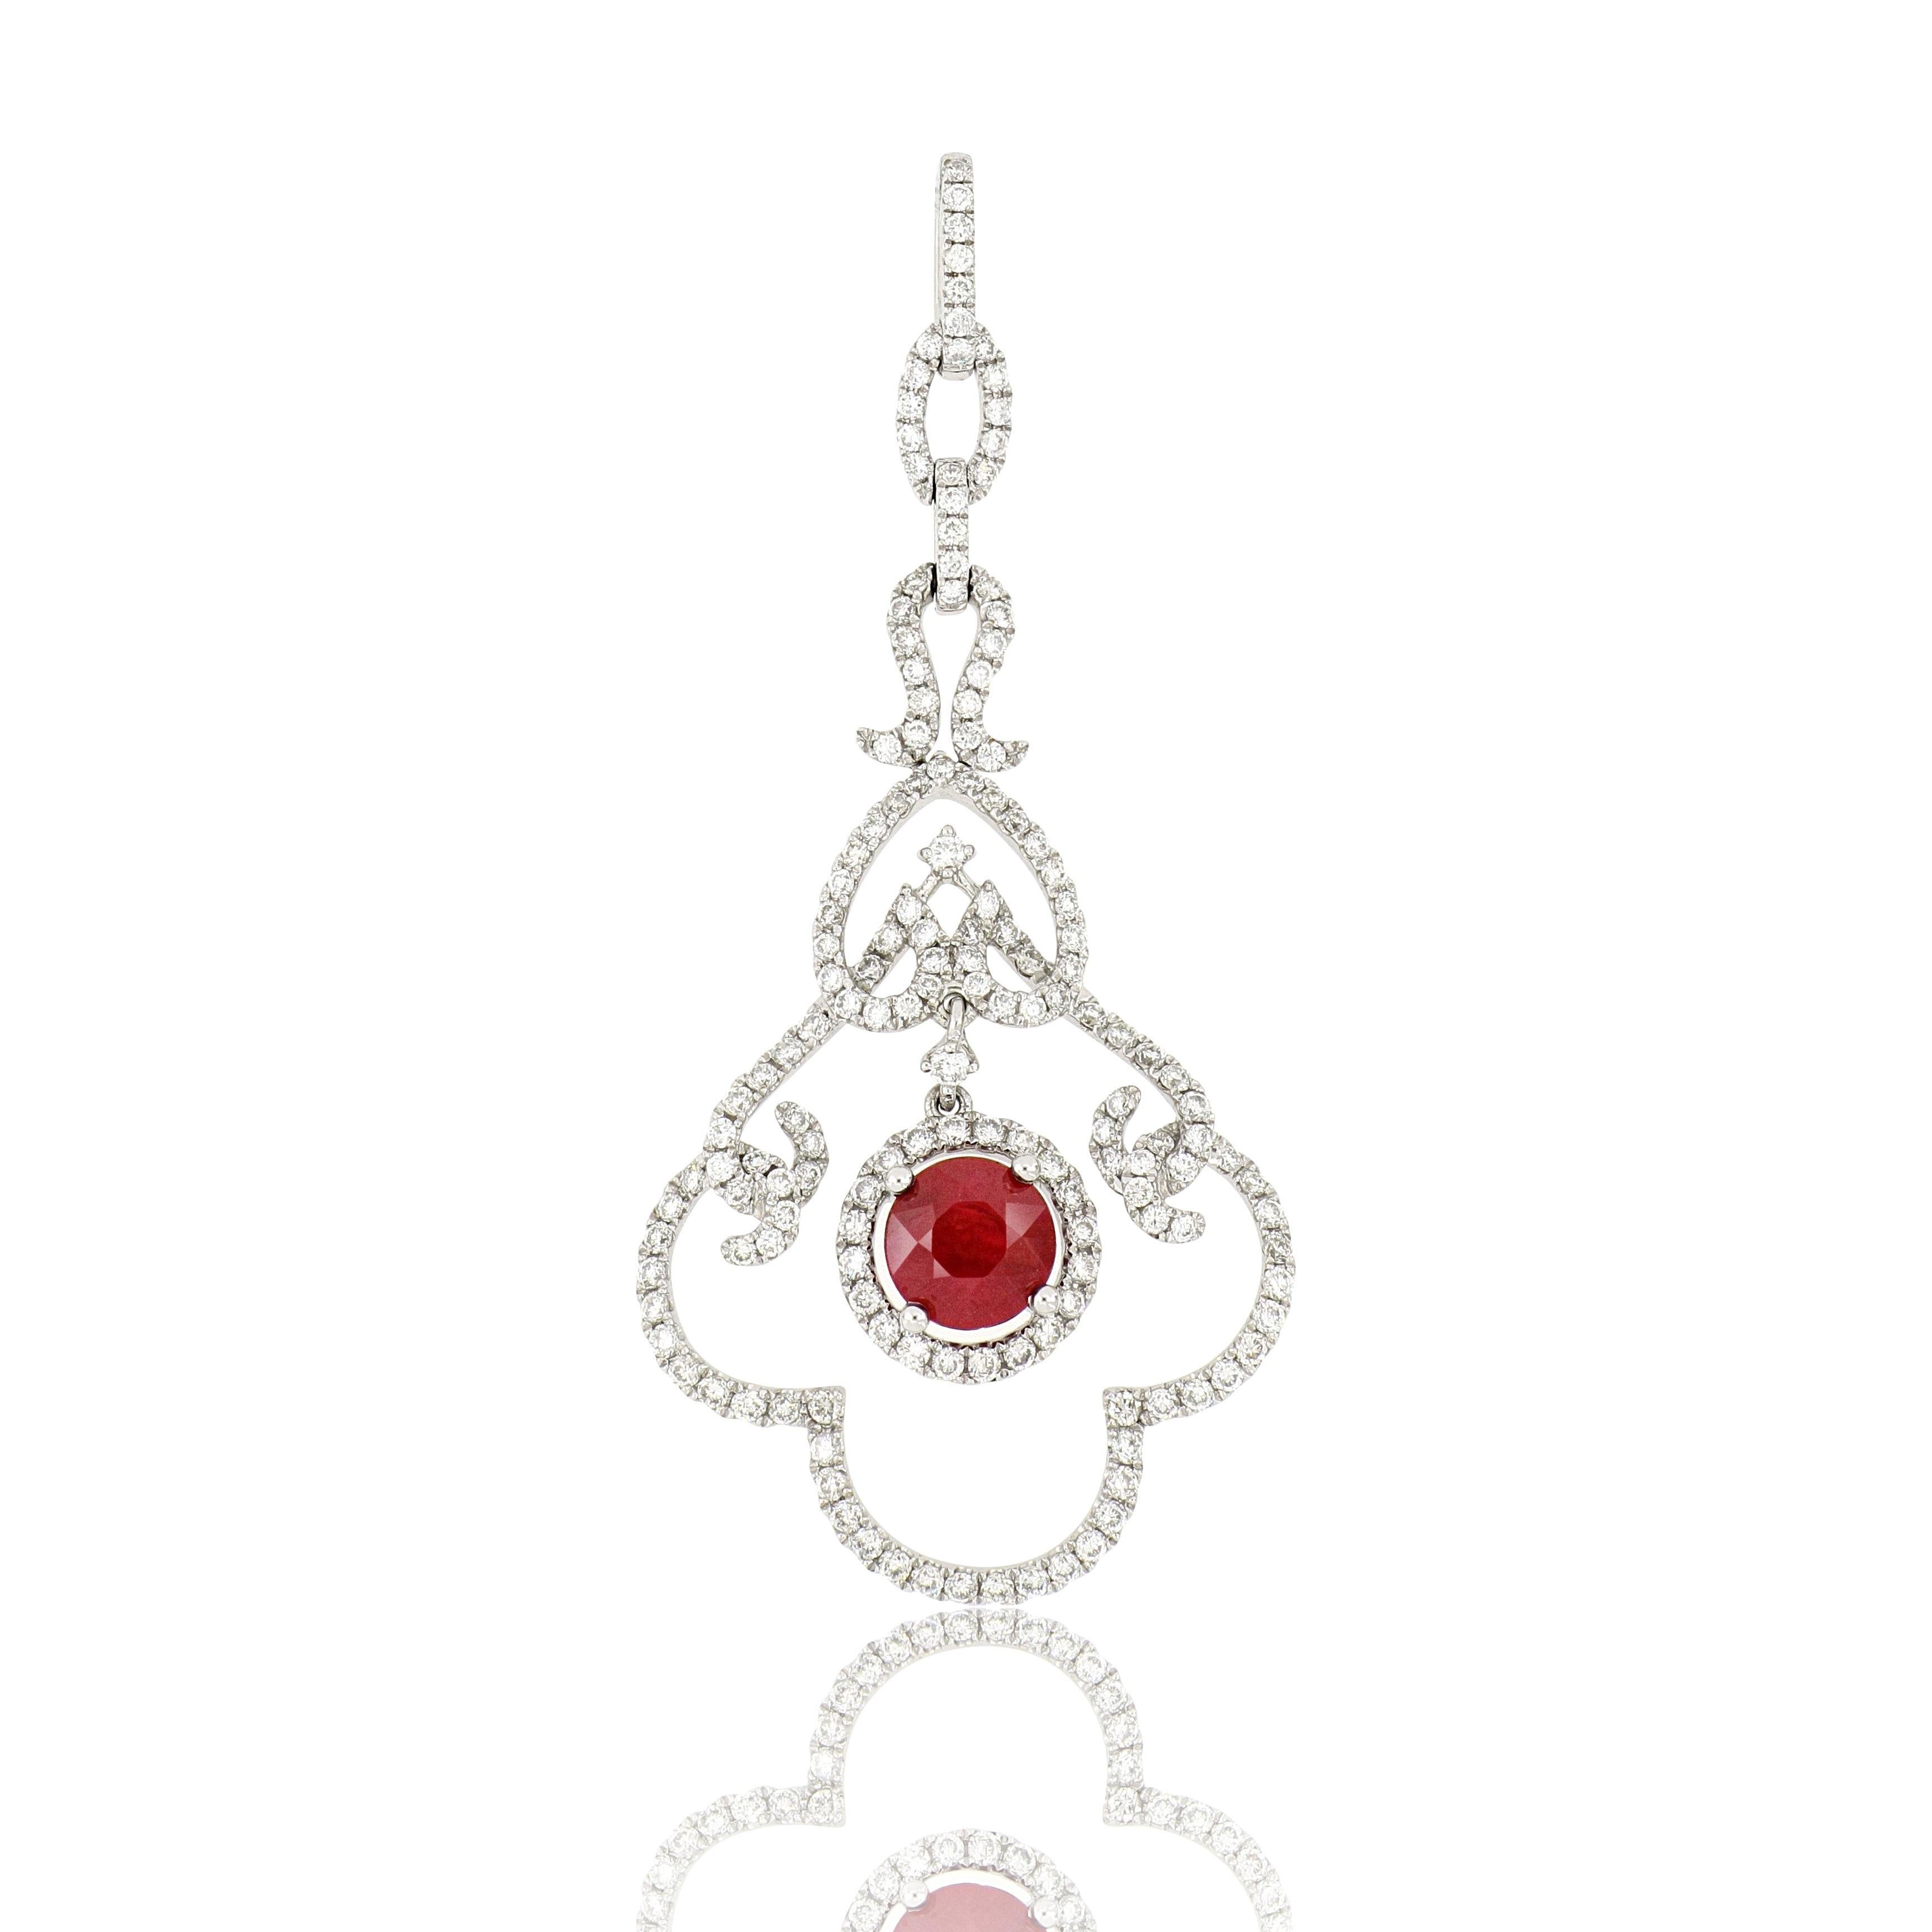 A natural ruby and diamond pendant. a round-brilliant cut ruby weighing 1.16 carats, sourced in Burma, set with brilliant cut diamonds totalling 1.07cts, mounted in 18 karat white gold.
O’Che 1867 is renowned for its high jewellery collections with